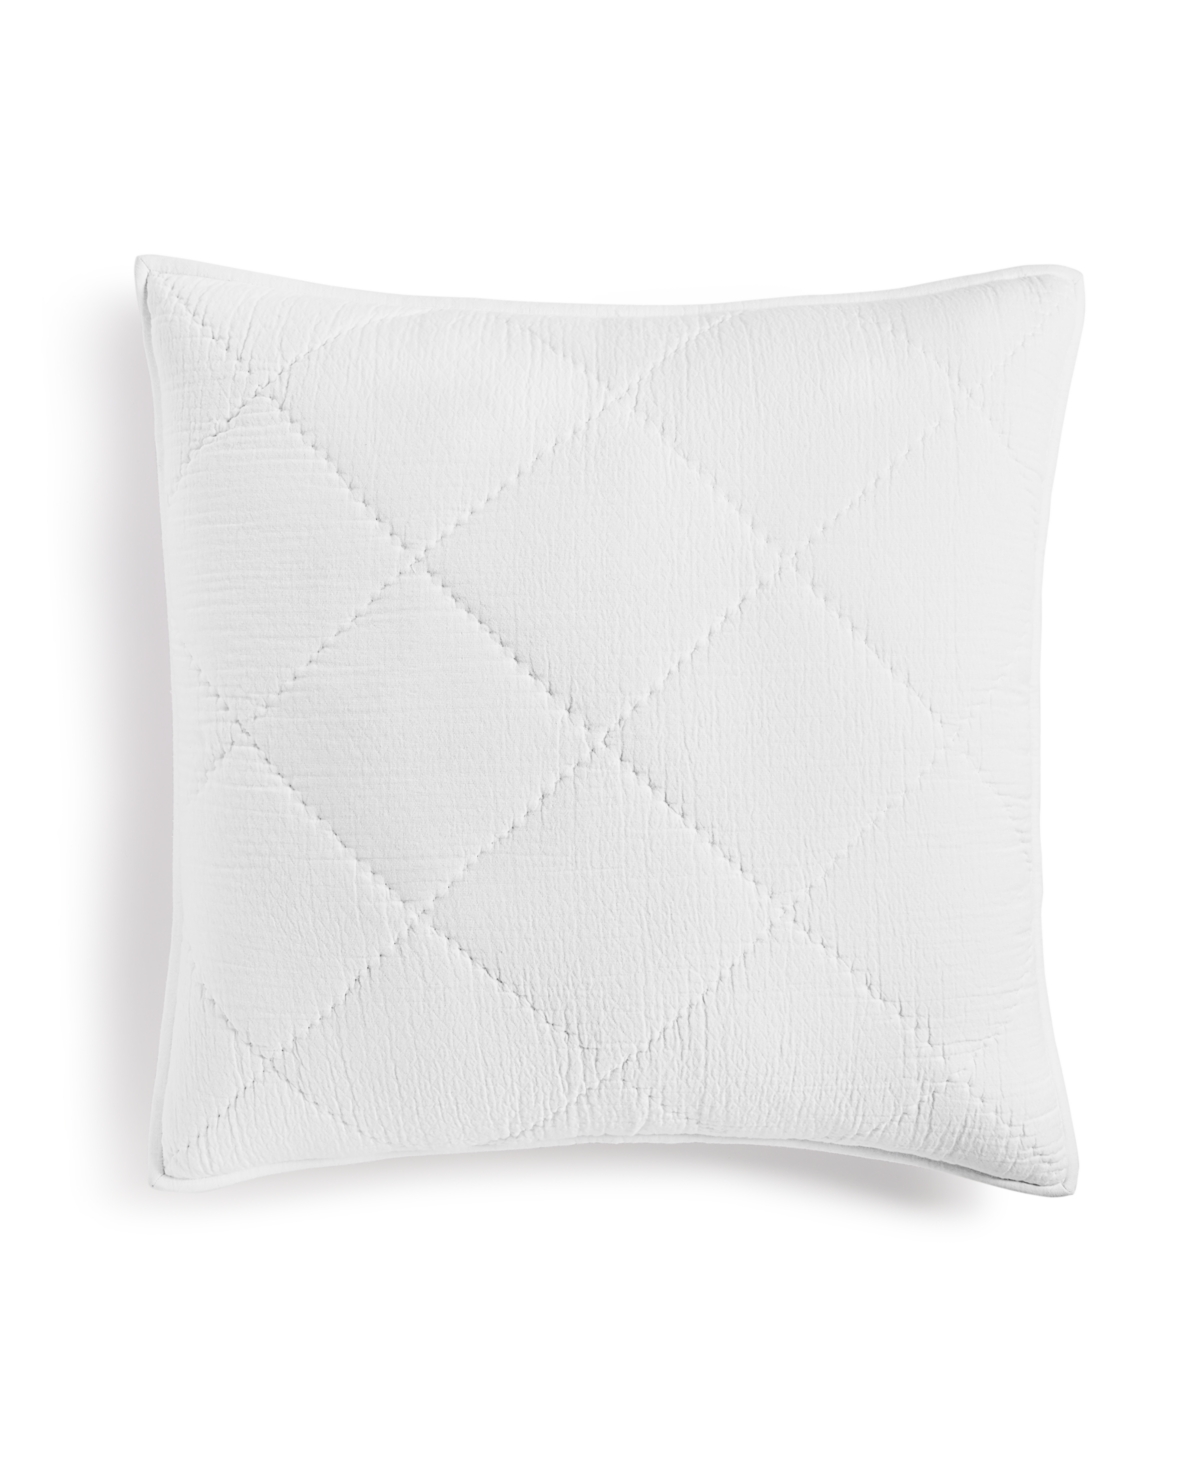 Dobby Diamond Quilted Sham, European, Created for Macy's - Natural